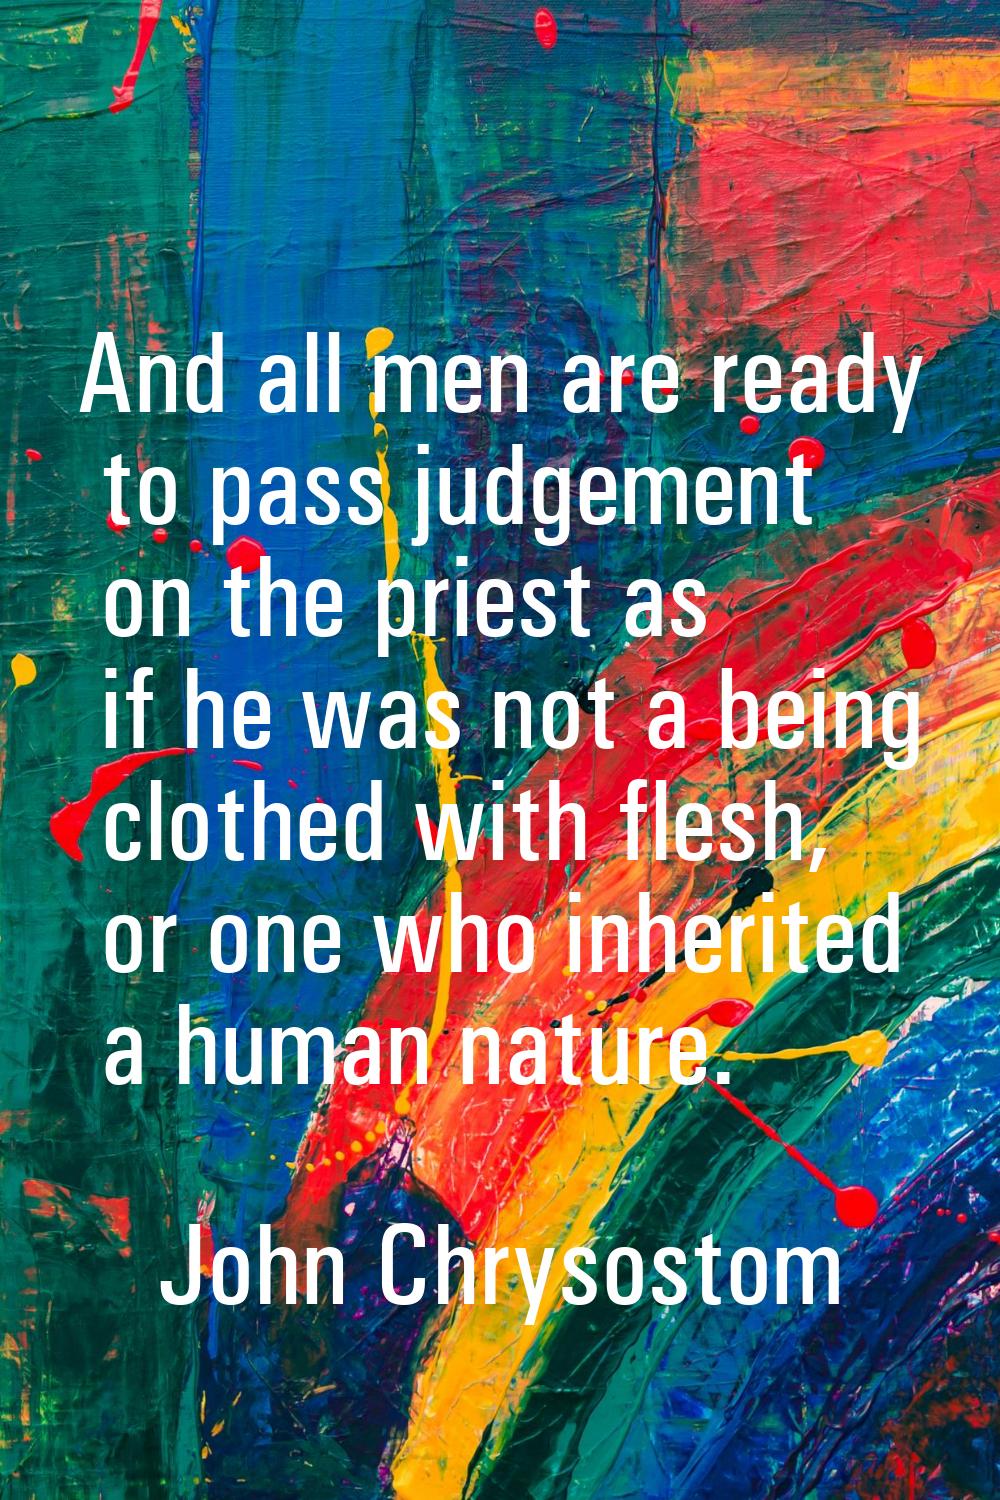 And all men are ready to pass judgement on the priest as if he was not a being clothed with flesh, 